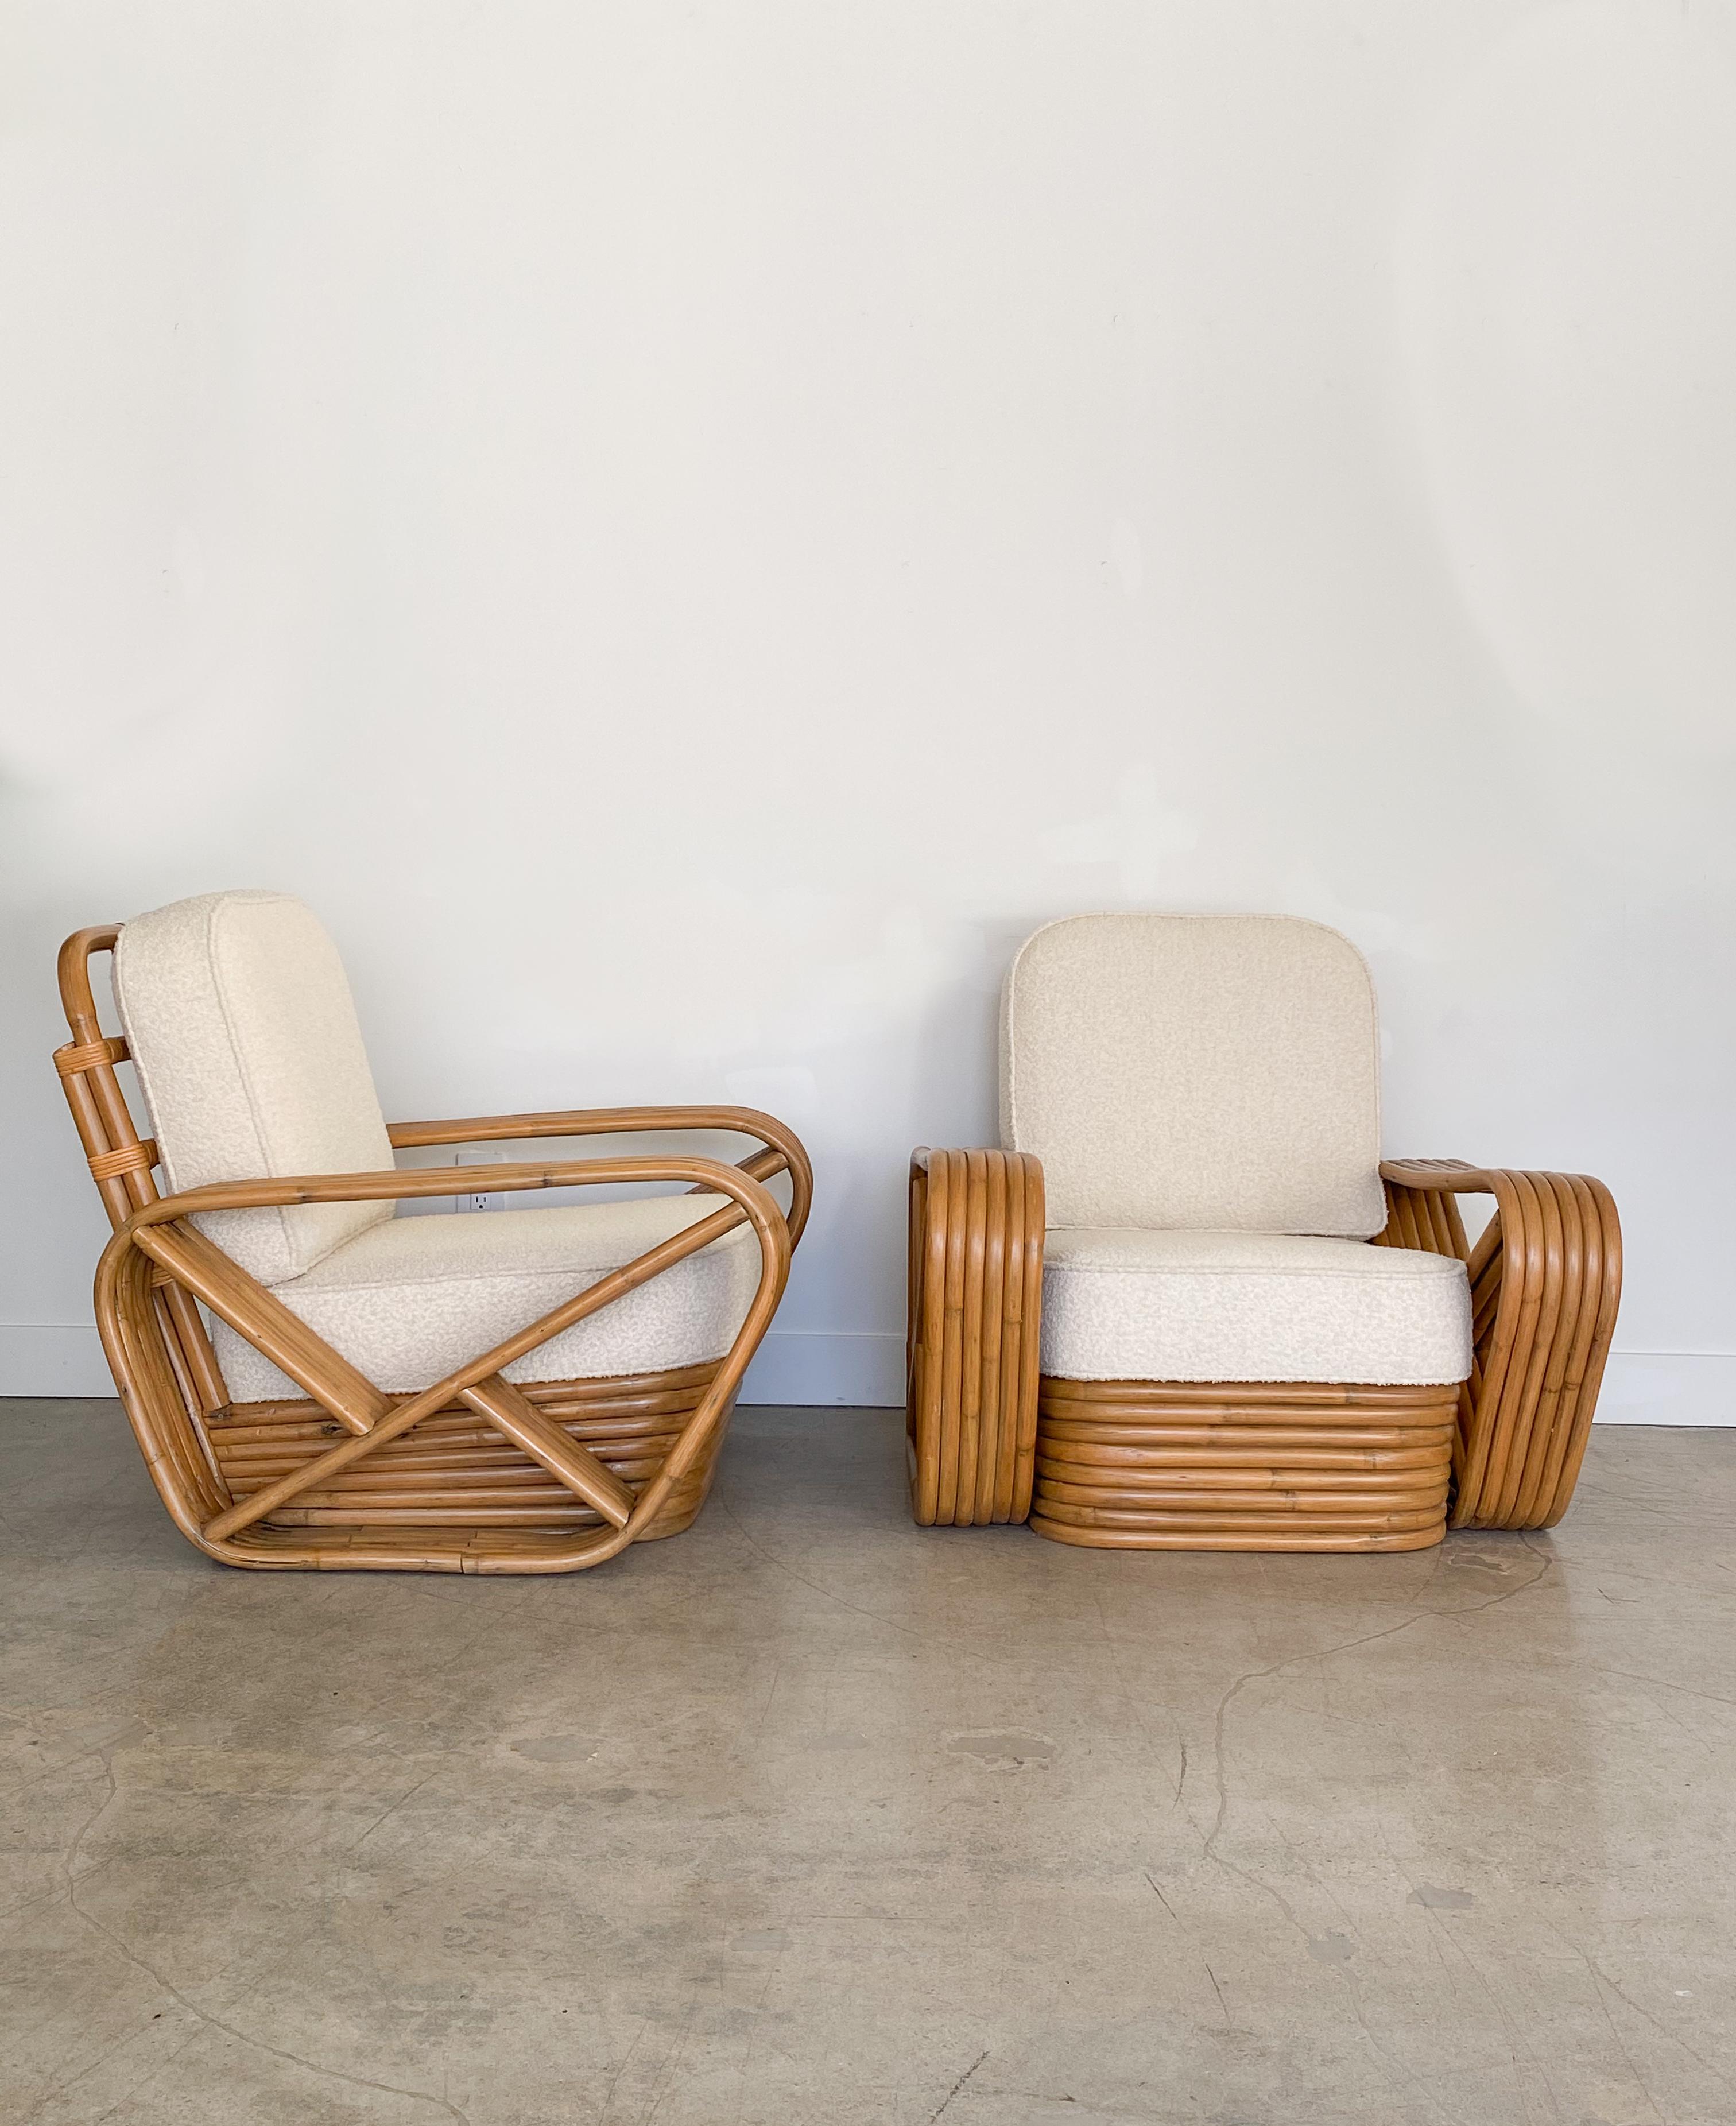 Pair of rattan lounge chairs in the style of Paul Frankl. Stacked rattan base and 6 strand arm with Classic design. Rattan has been restored and cushions newly upholstered in a creamy bouclé.